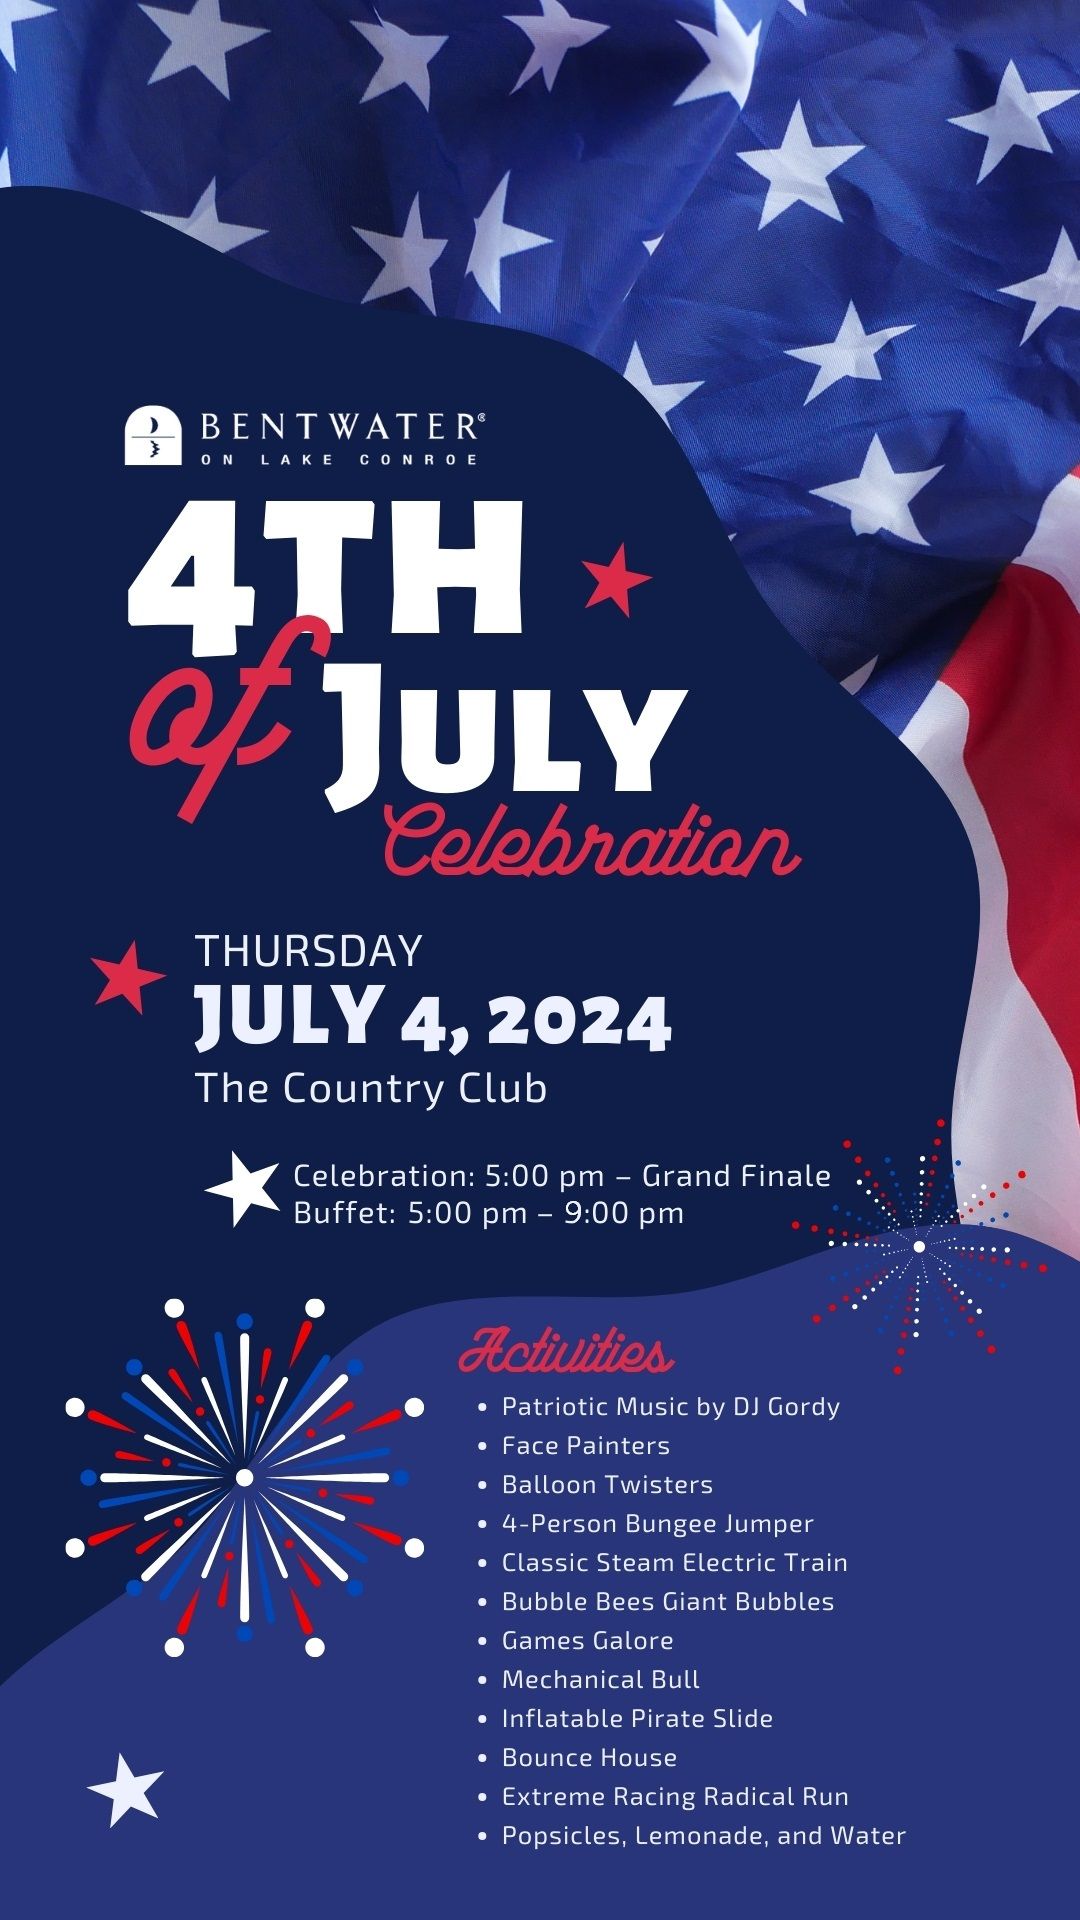 Lake Conroe's Biggest and Best Independence Day Celebration